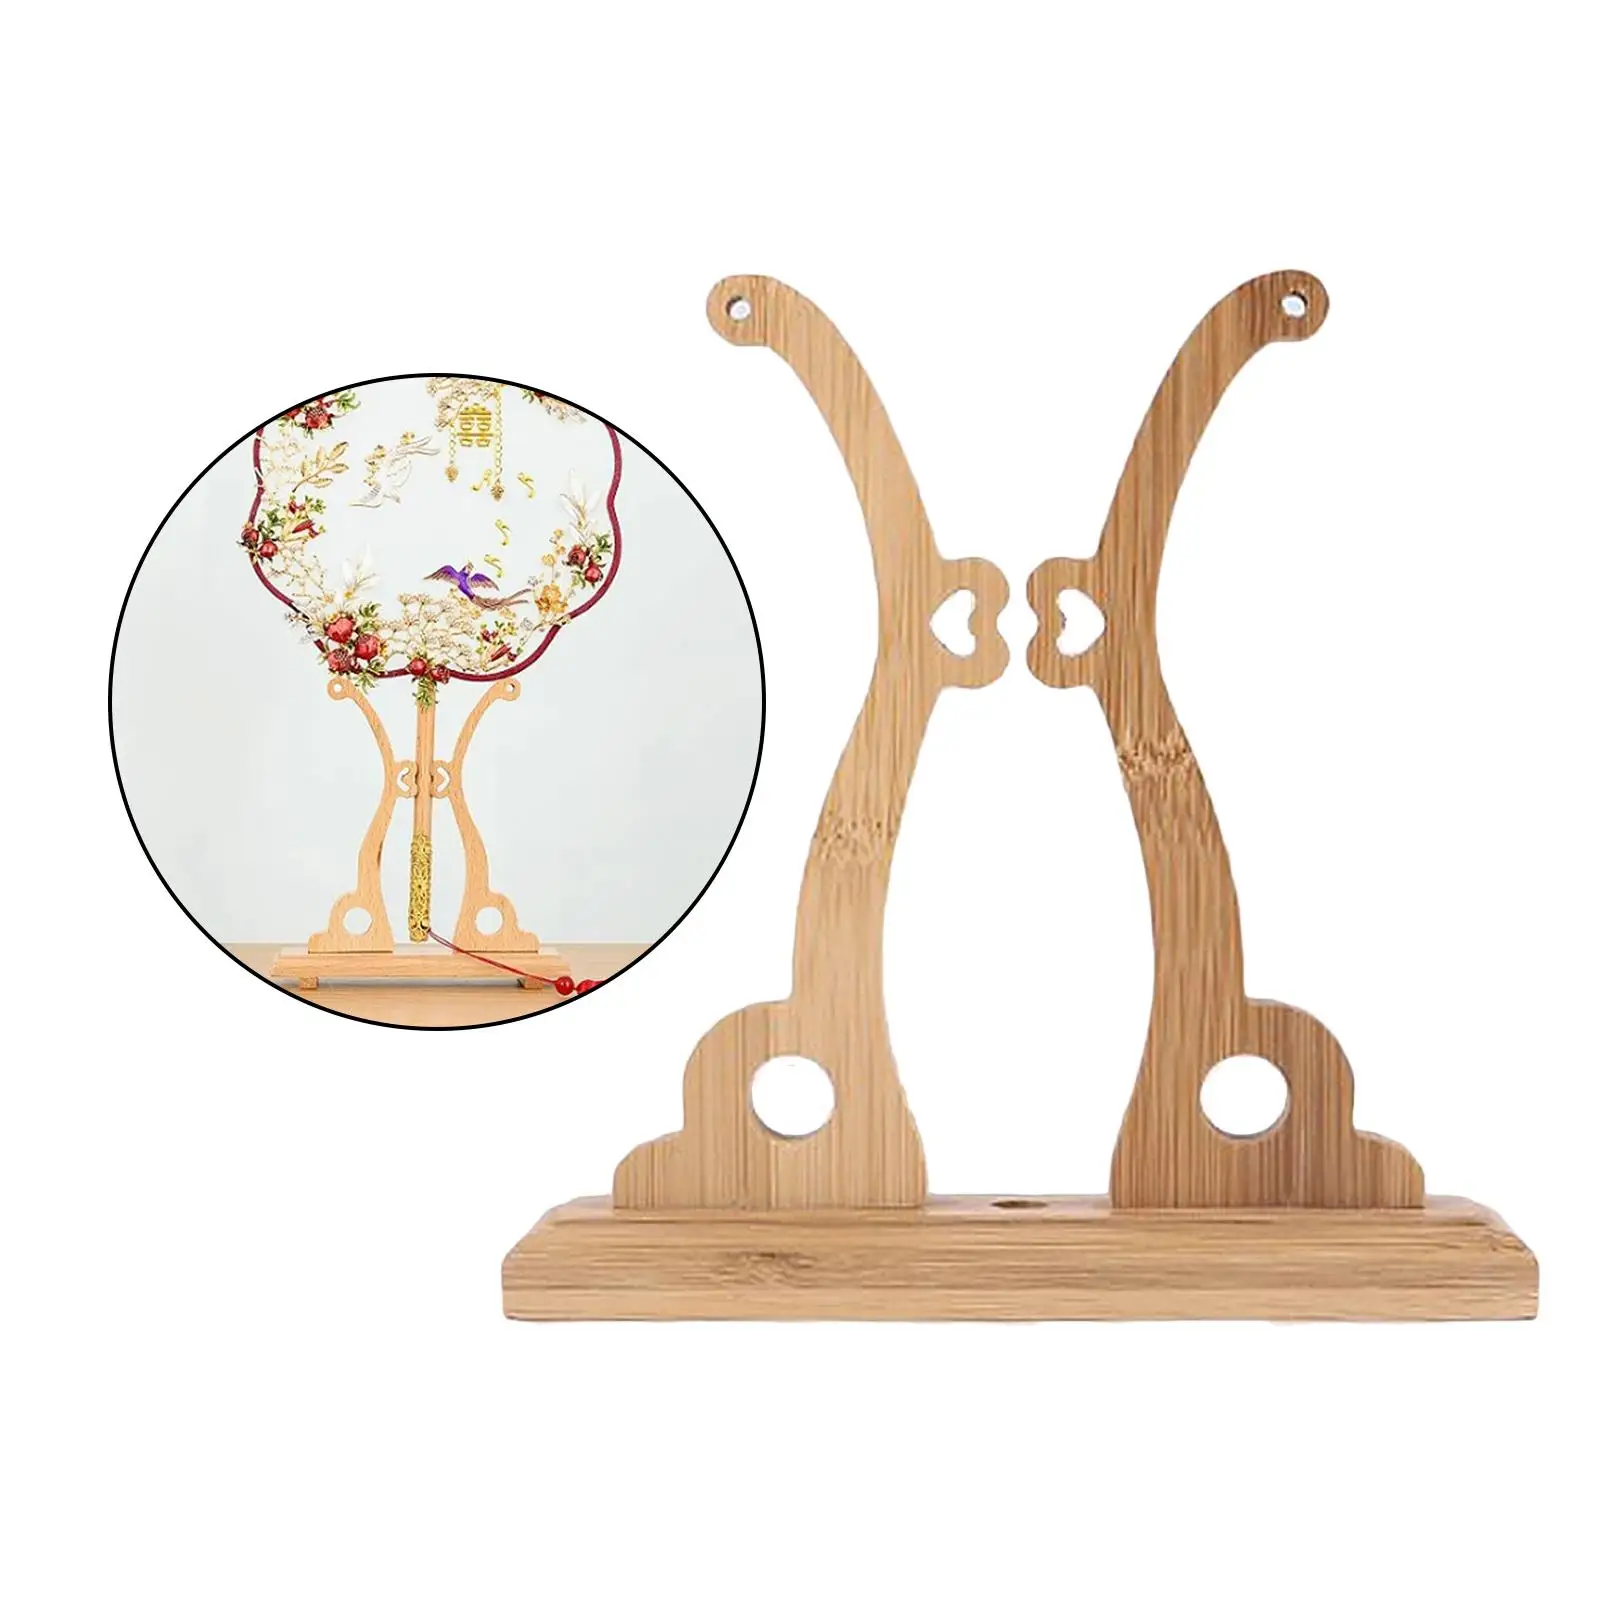 Hand Hold Circular Fan Stand Display Holder Home Office Desktop Decoration